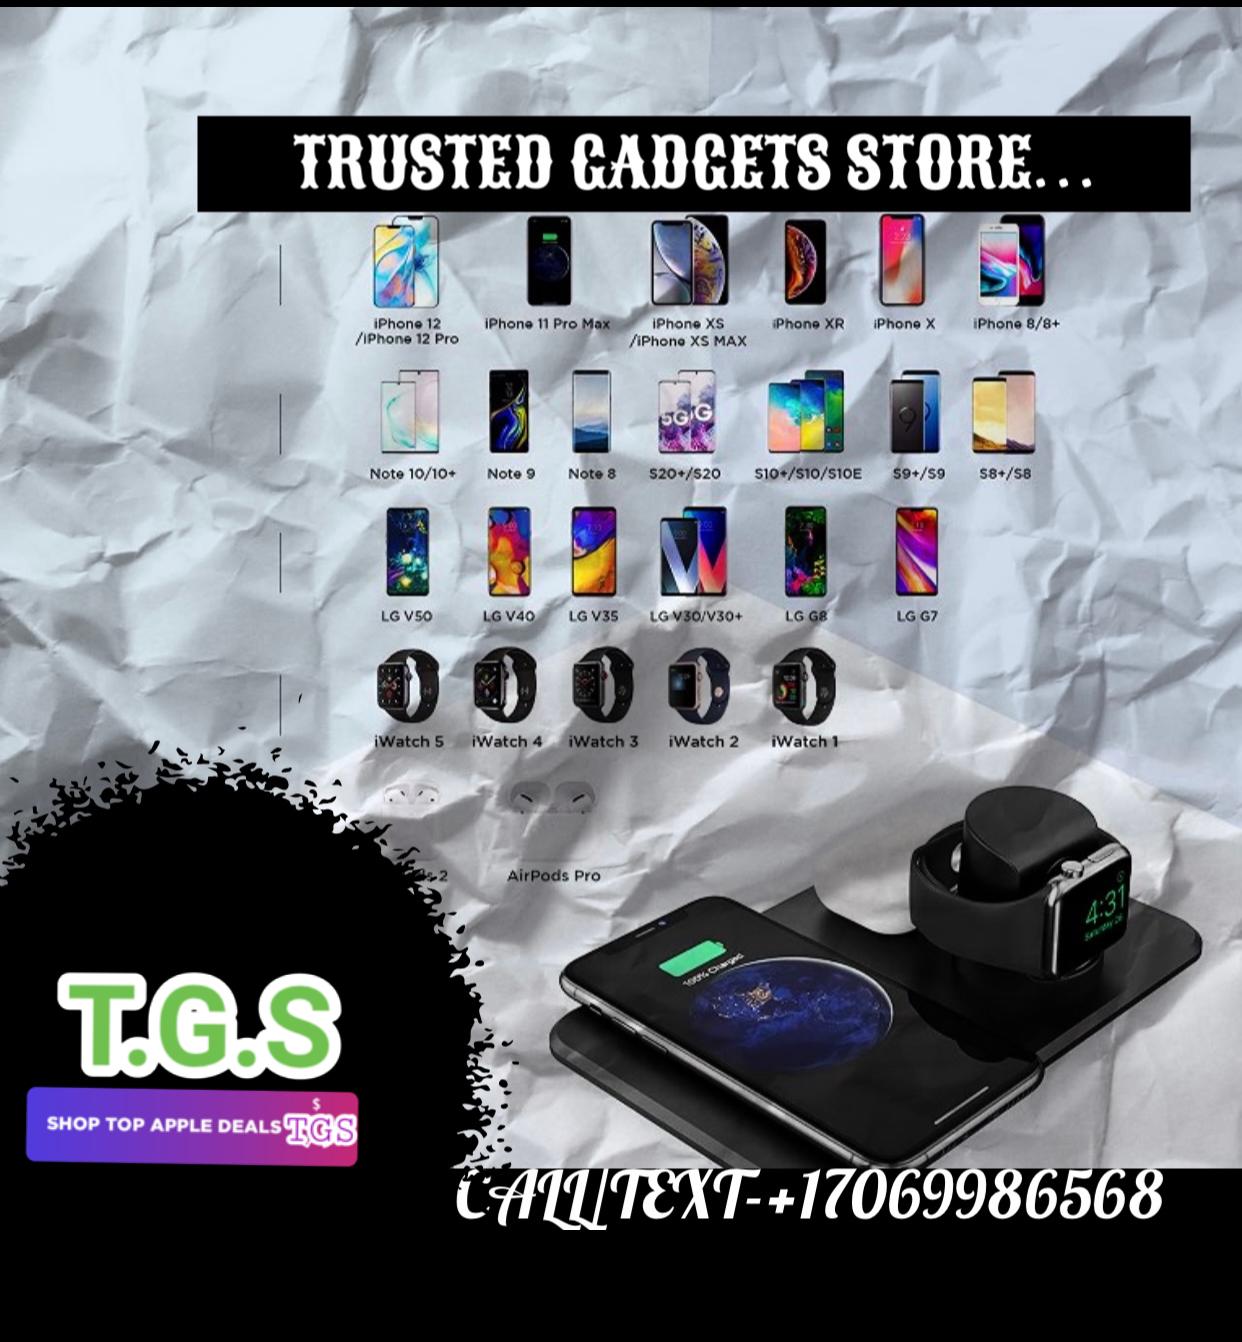 Trusted gadgets store 